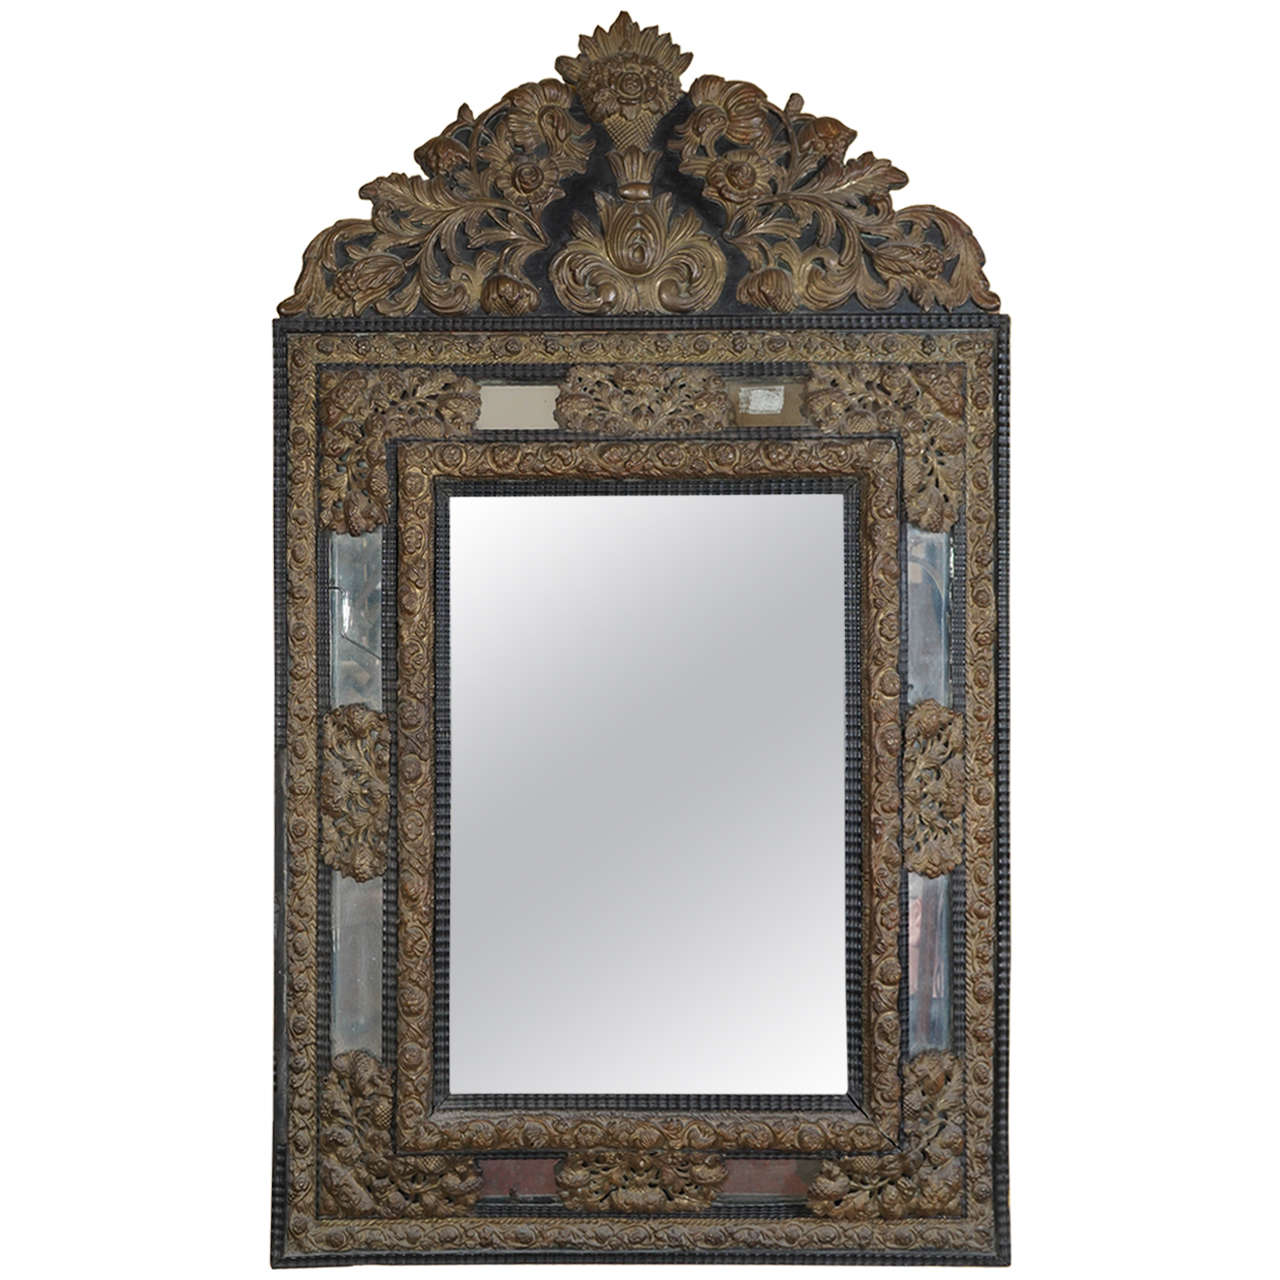 Large 19th Century Ornate French Mirror